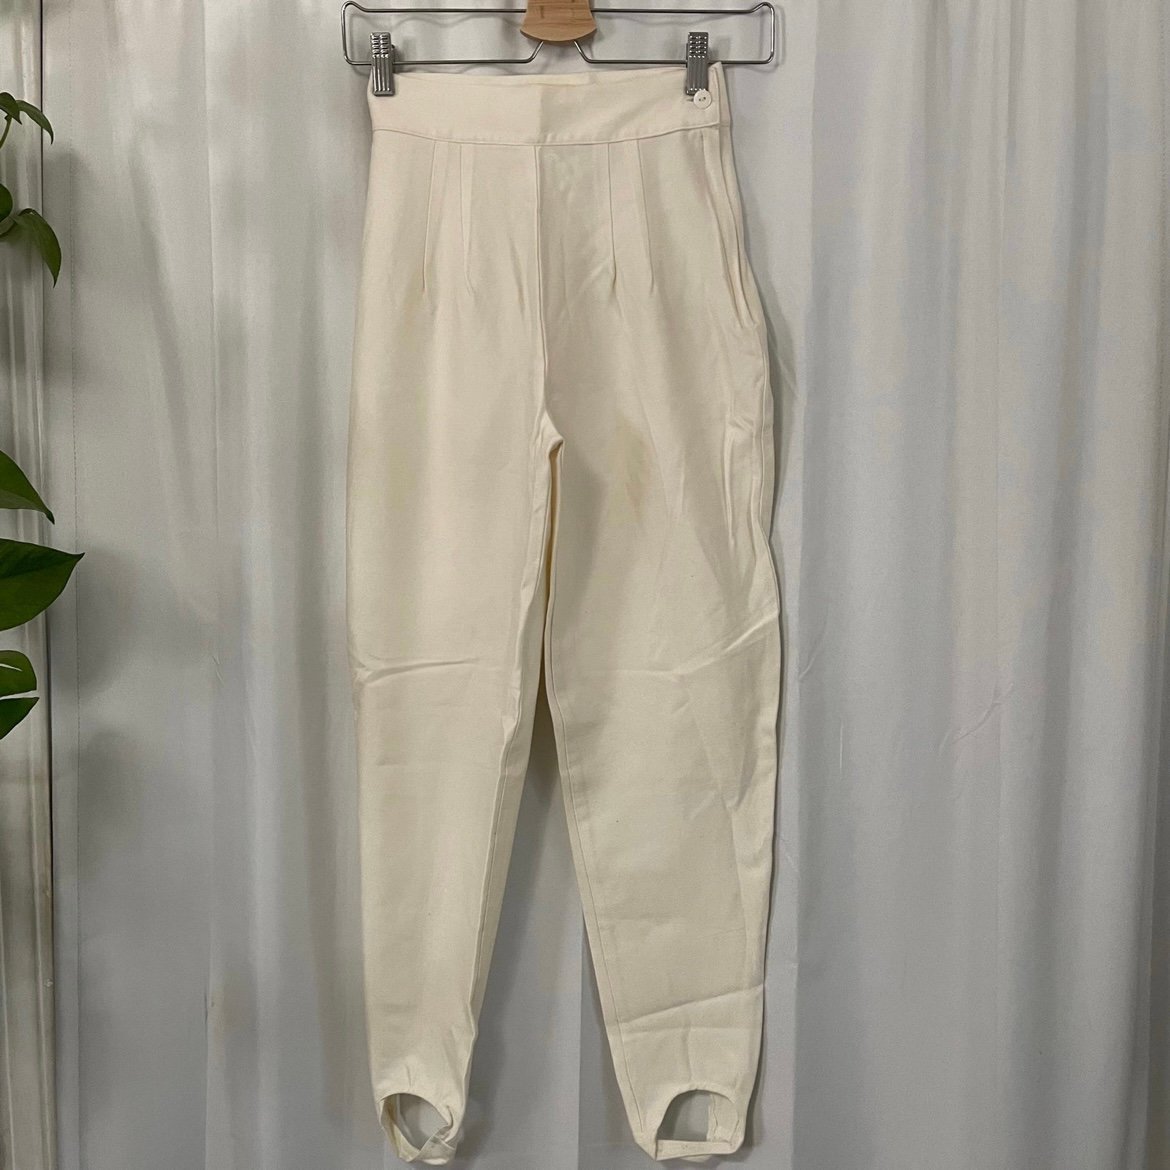 Personality Vintage rampage high waist pants with feet 